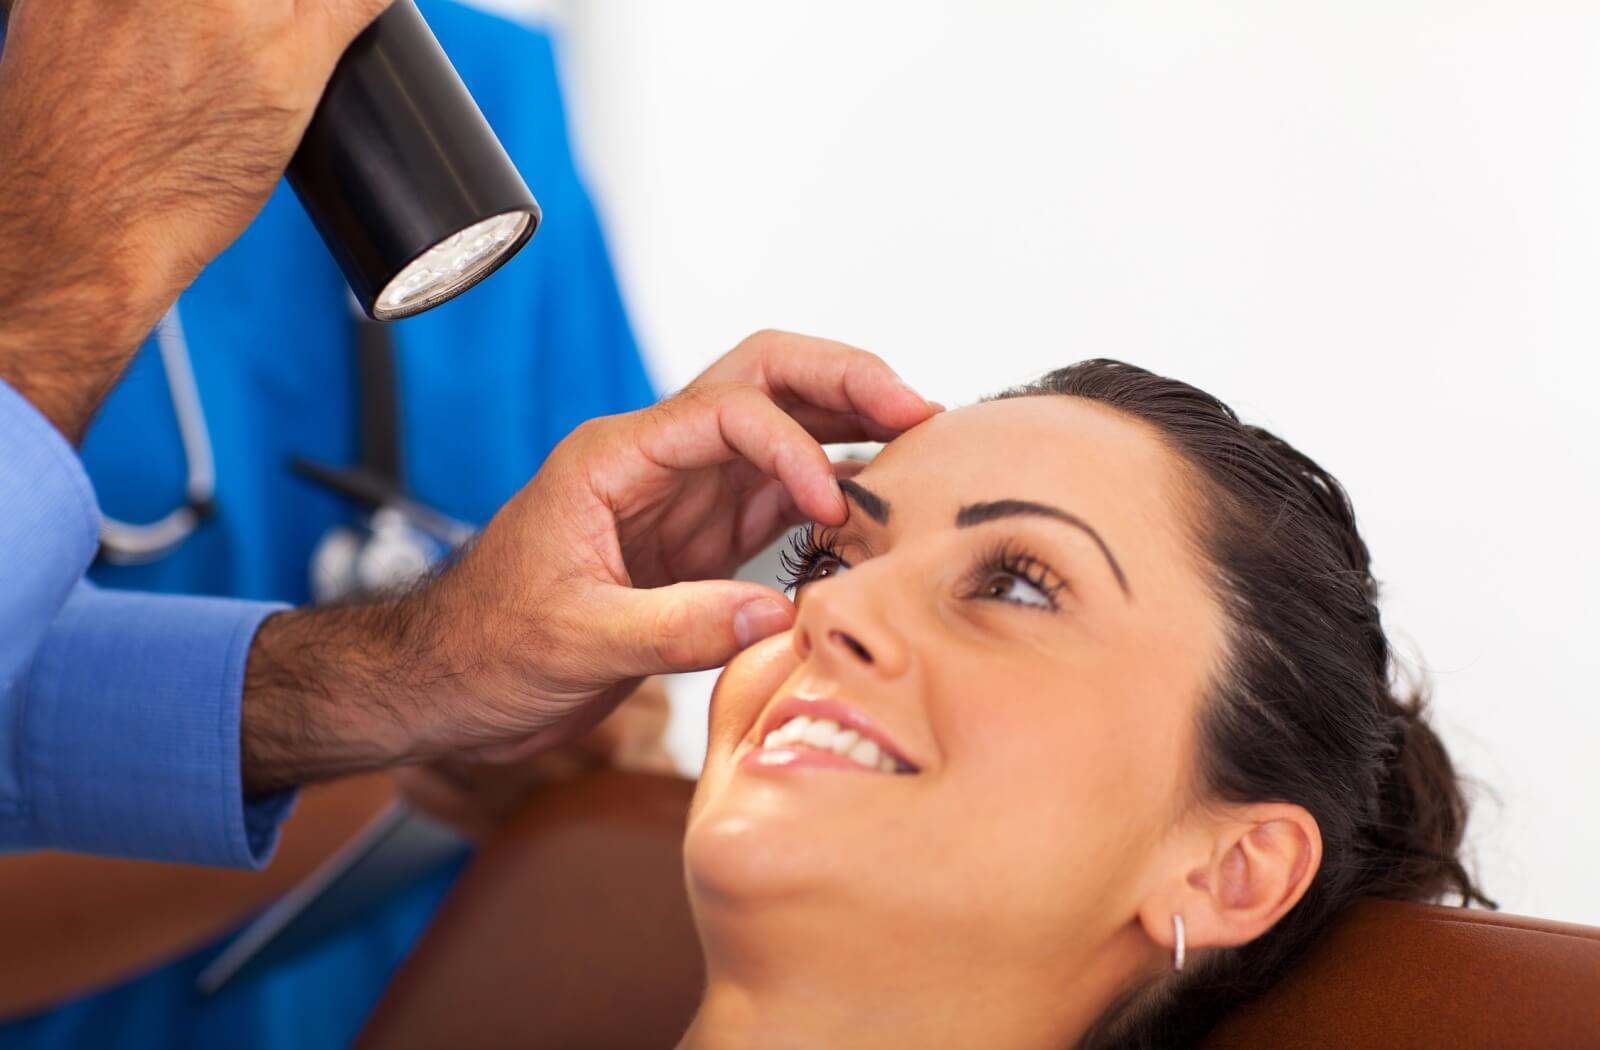 A doctor assessing the health of their patient's eye.